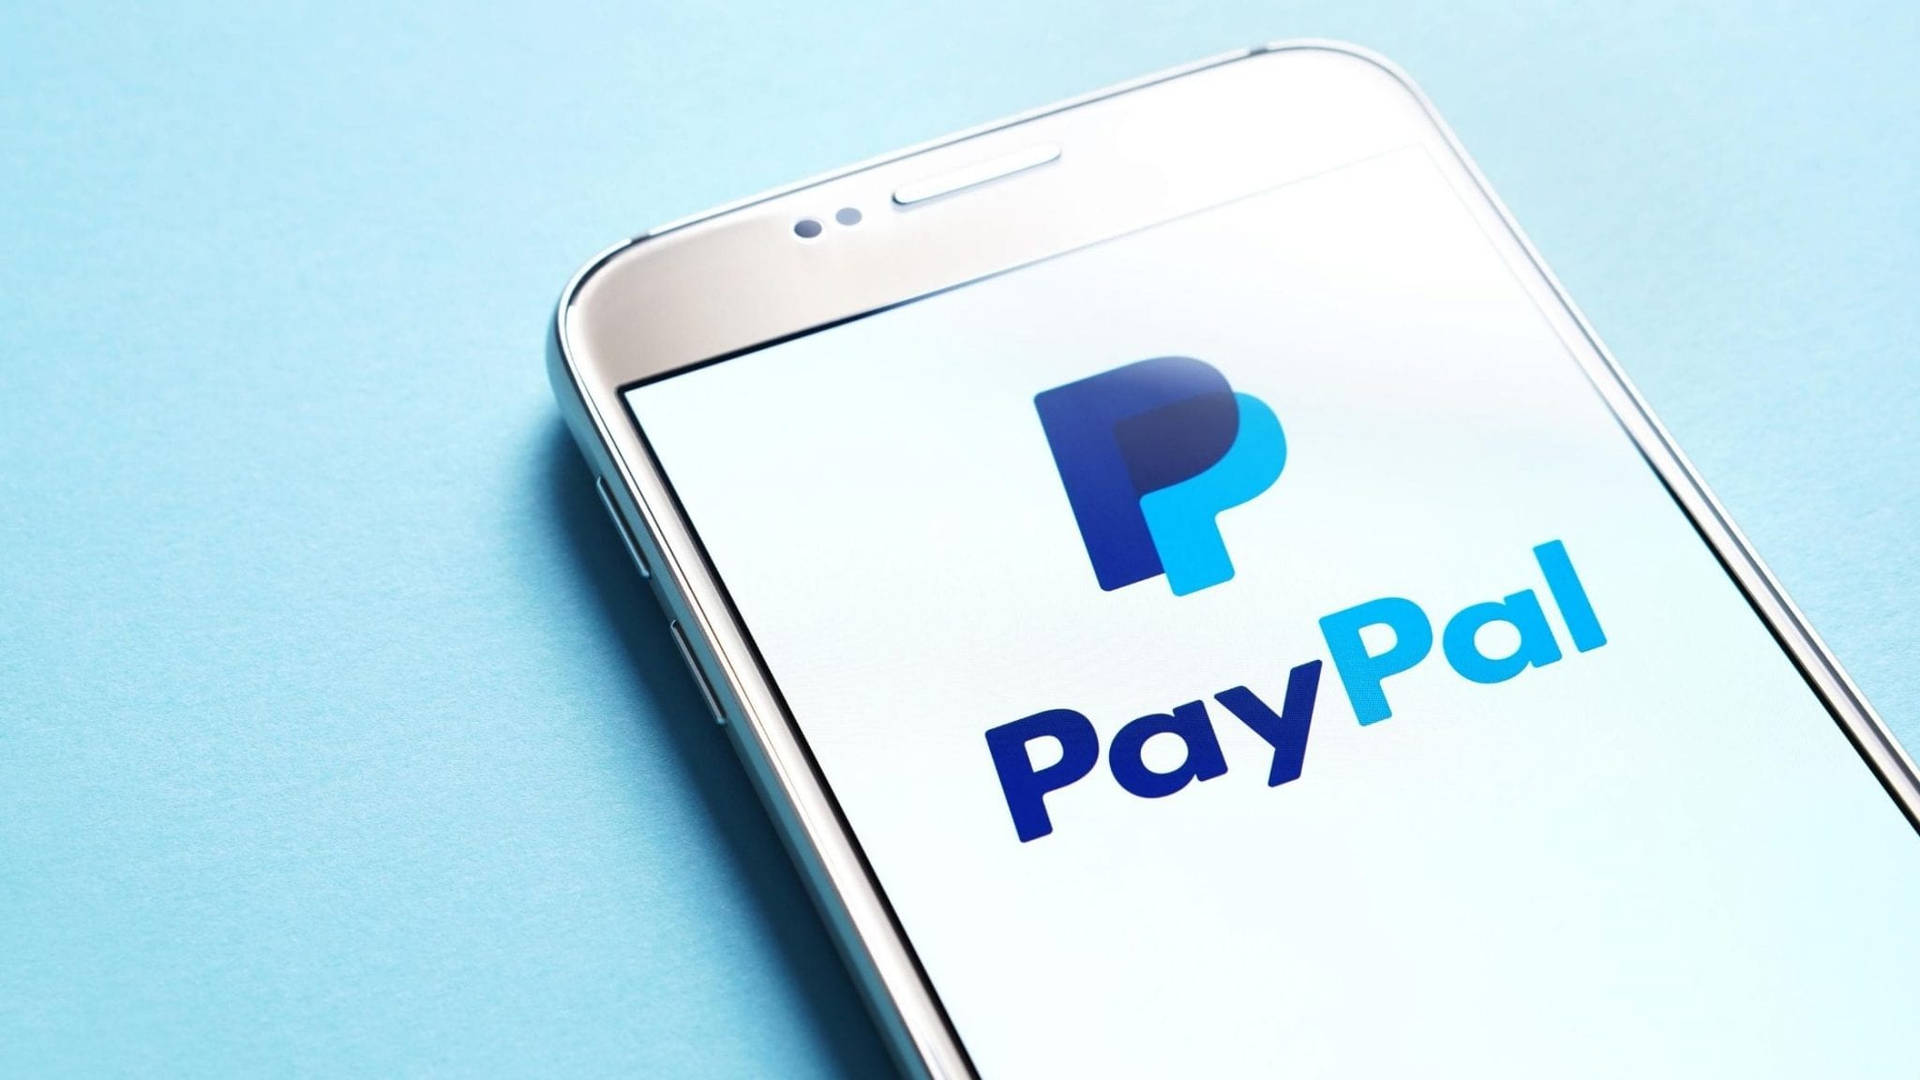 Paypal Logo At Smartphone Screen Background